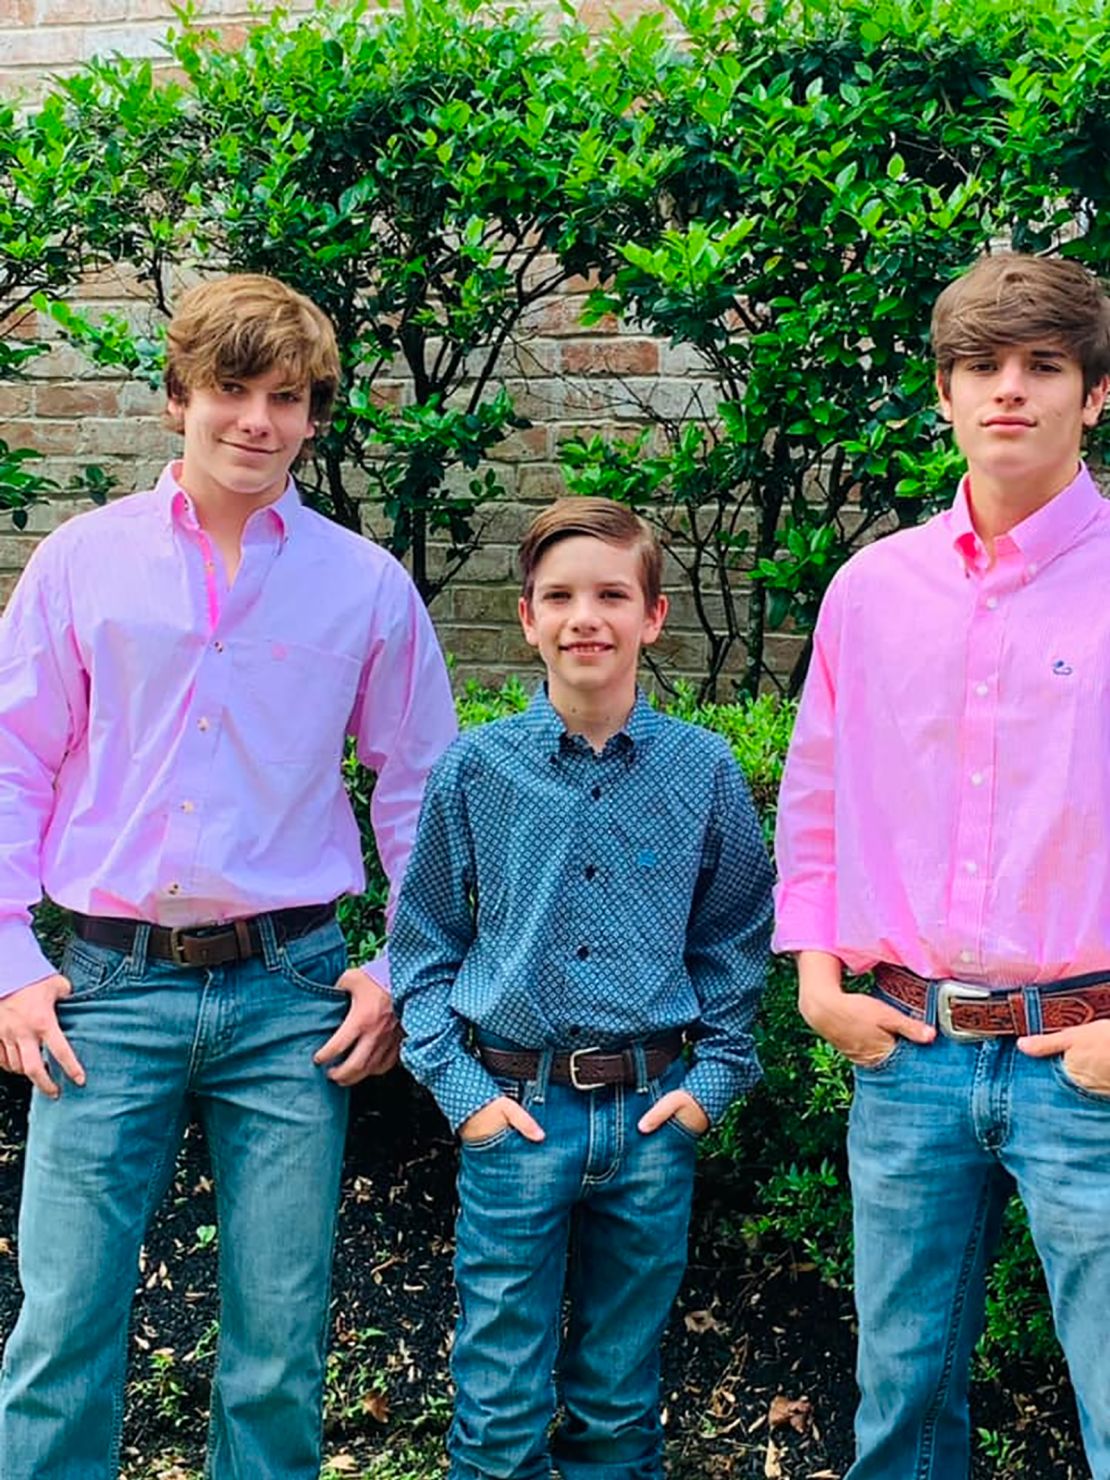 From left, Carson Collins, 16, Hudson Collins, 11, and Waylon Collins, 18.